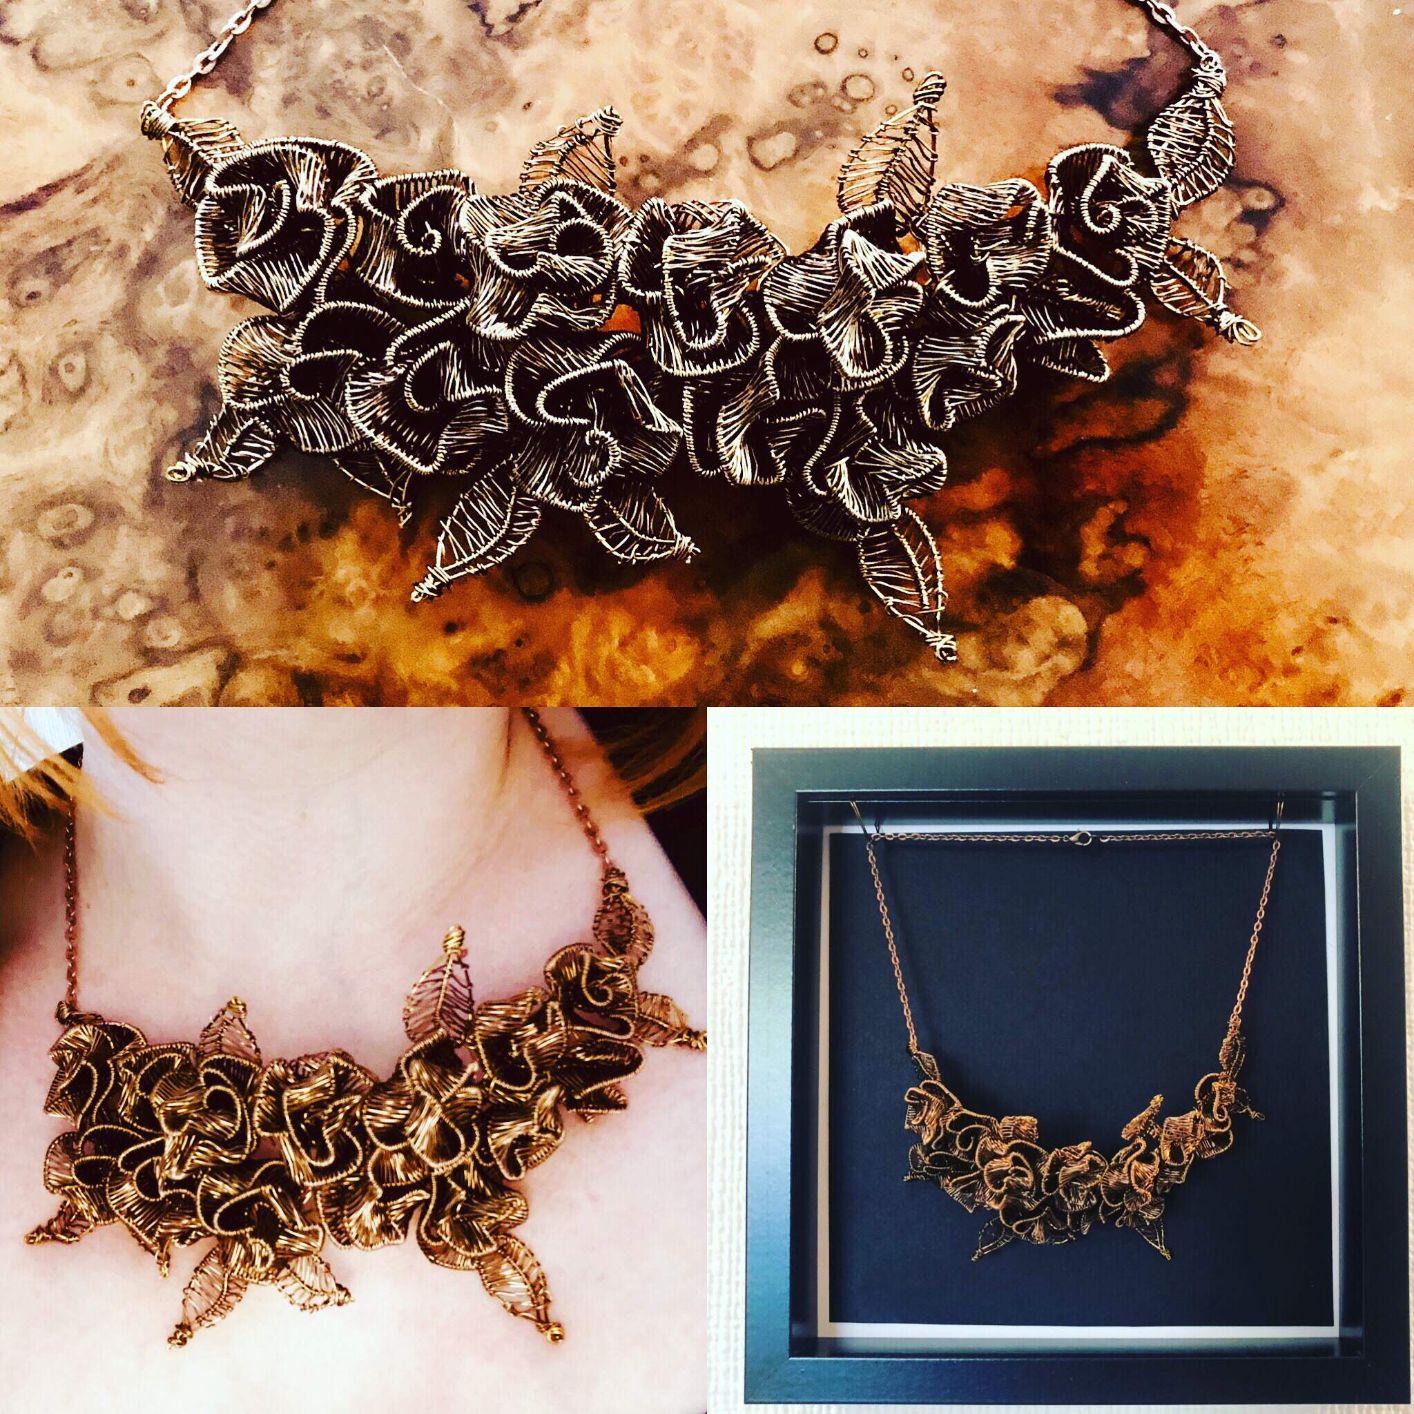 A necklace hand crafted with 14 woven roses and leaves to create a unique statement necklace